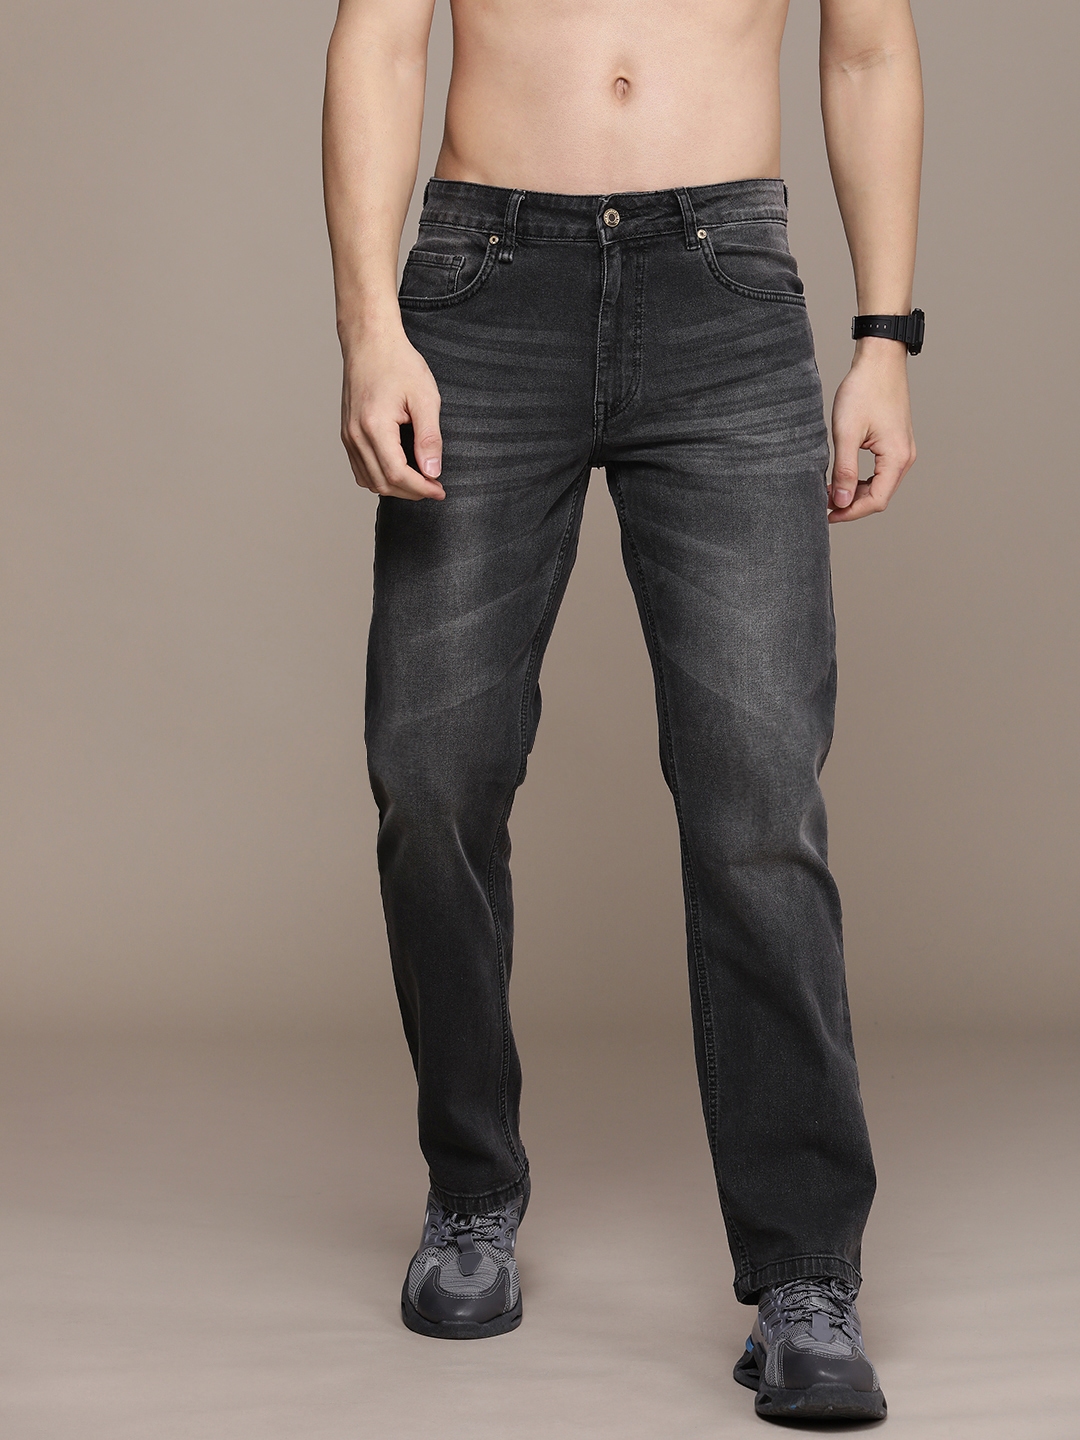 Buy Roadster Men Heavy Fade Stretchable Jeans - Jeans for Men 25816298 ...